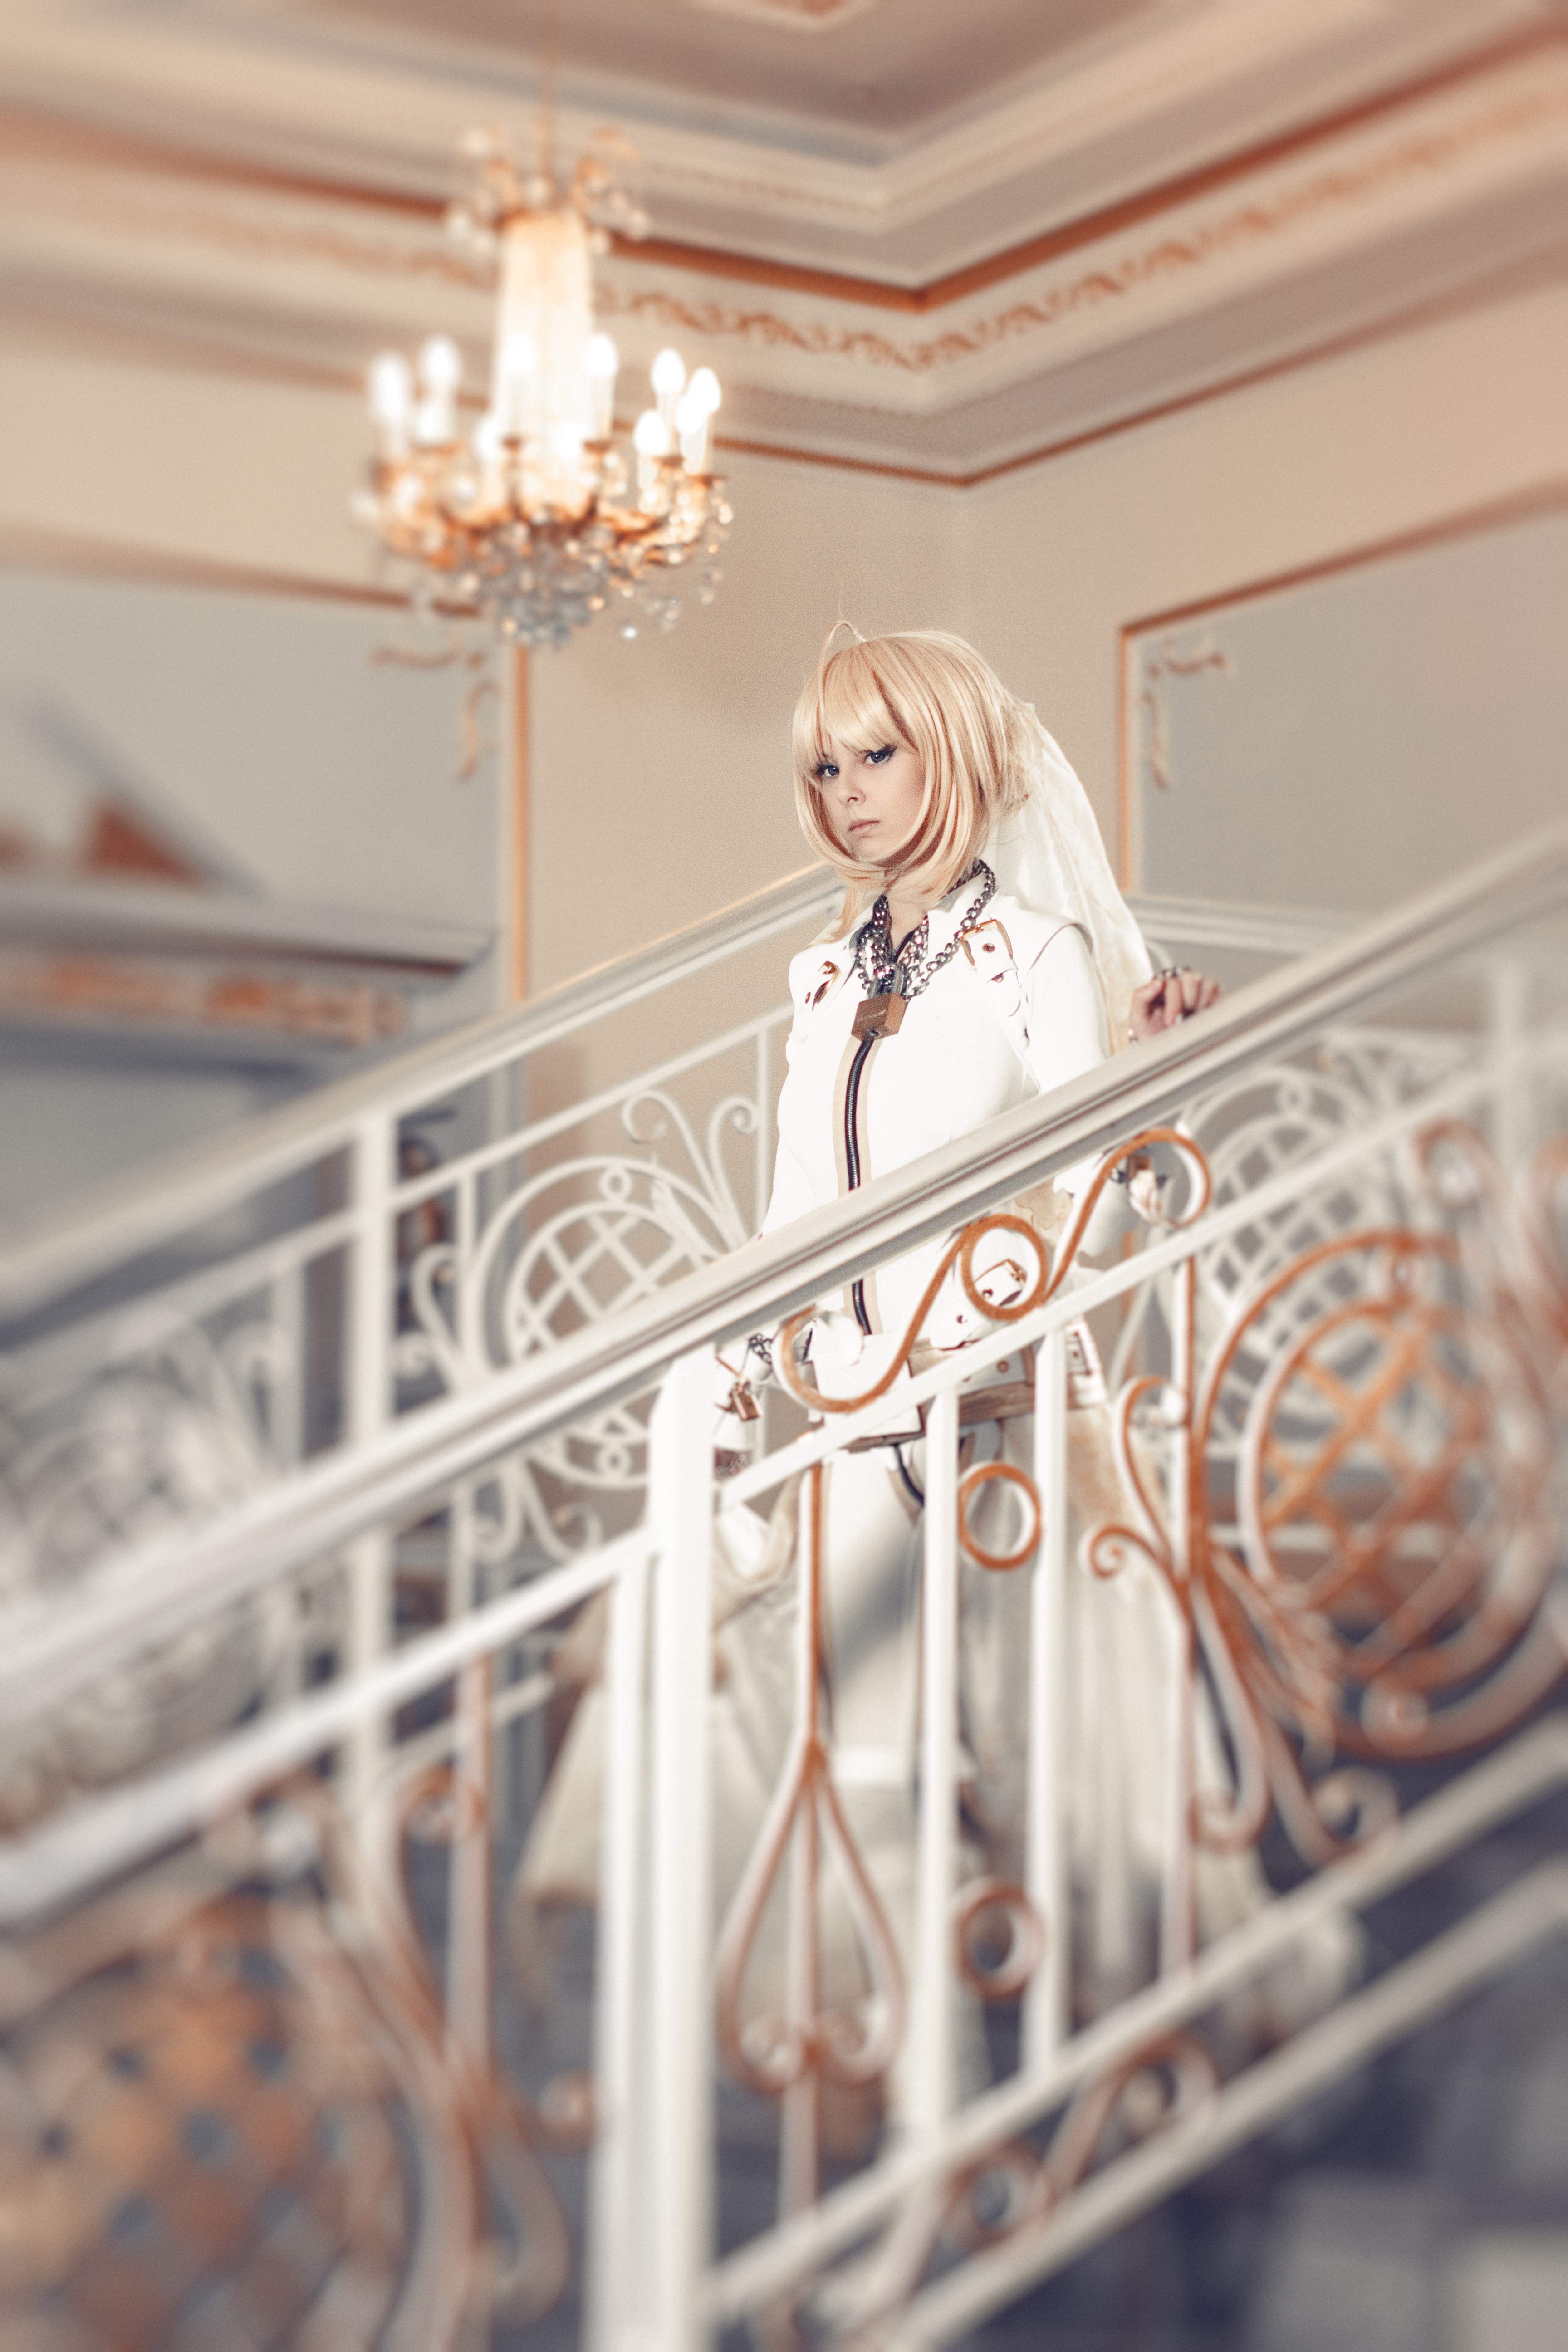 Suits Boots Cosplay Saber Bride Long Hair Blonde Blue Eyes Leather Boots Leather Clothing Stairs Hel 3456x5184